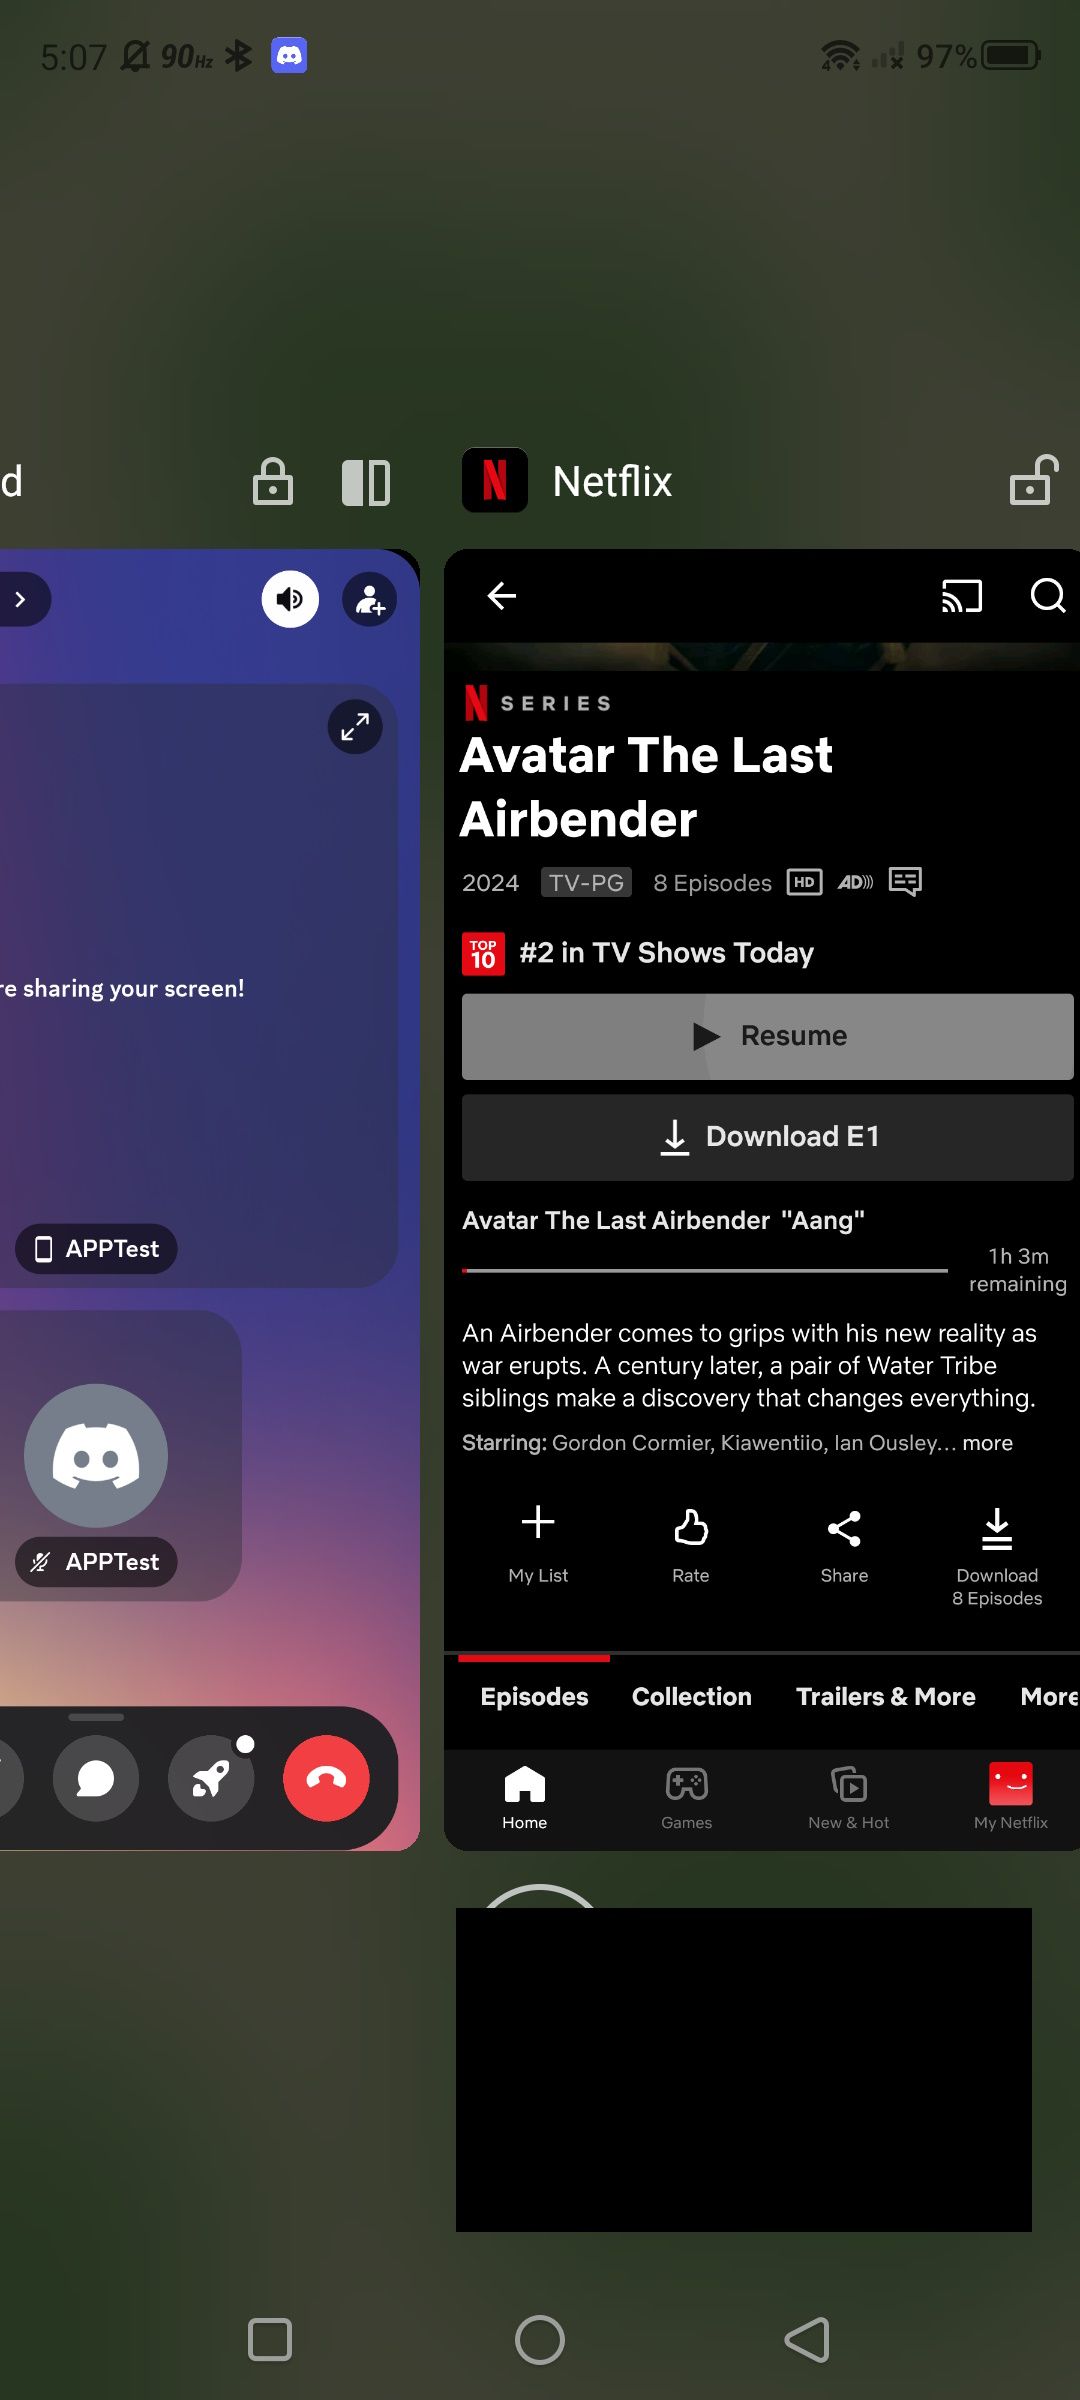 discord and netflix app swapping windows on mobile with video thumbnail displayed at the bottom